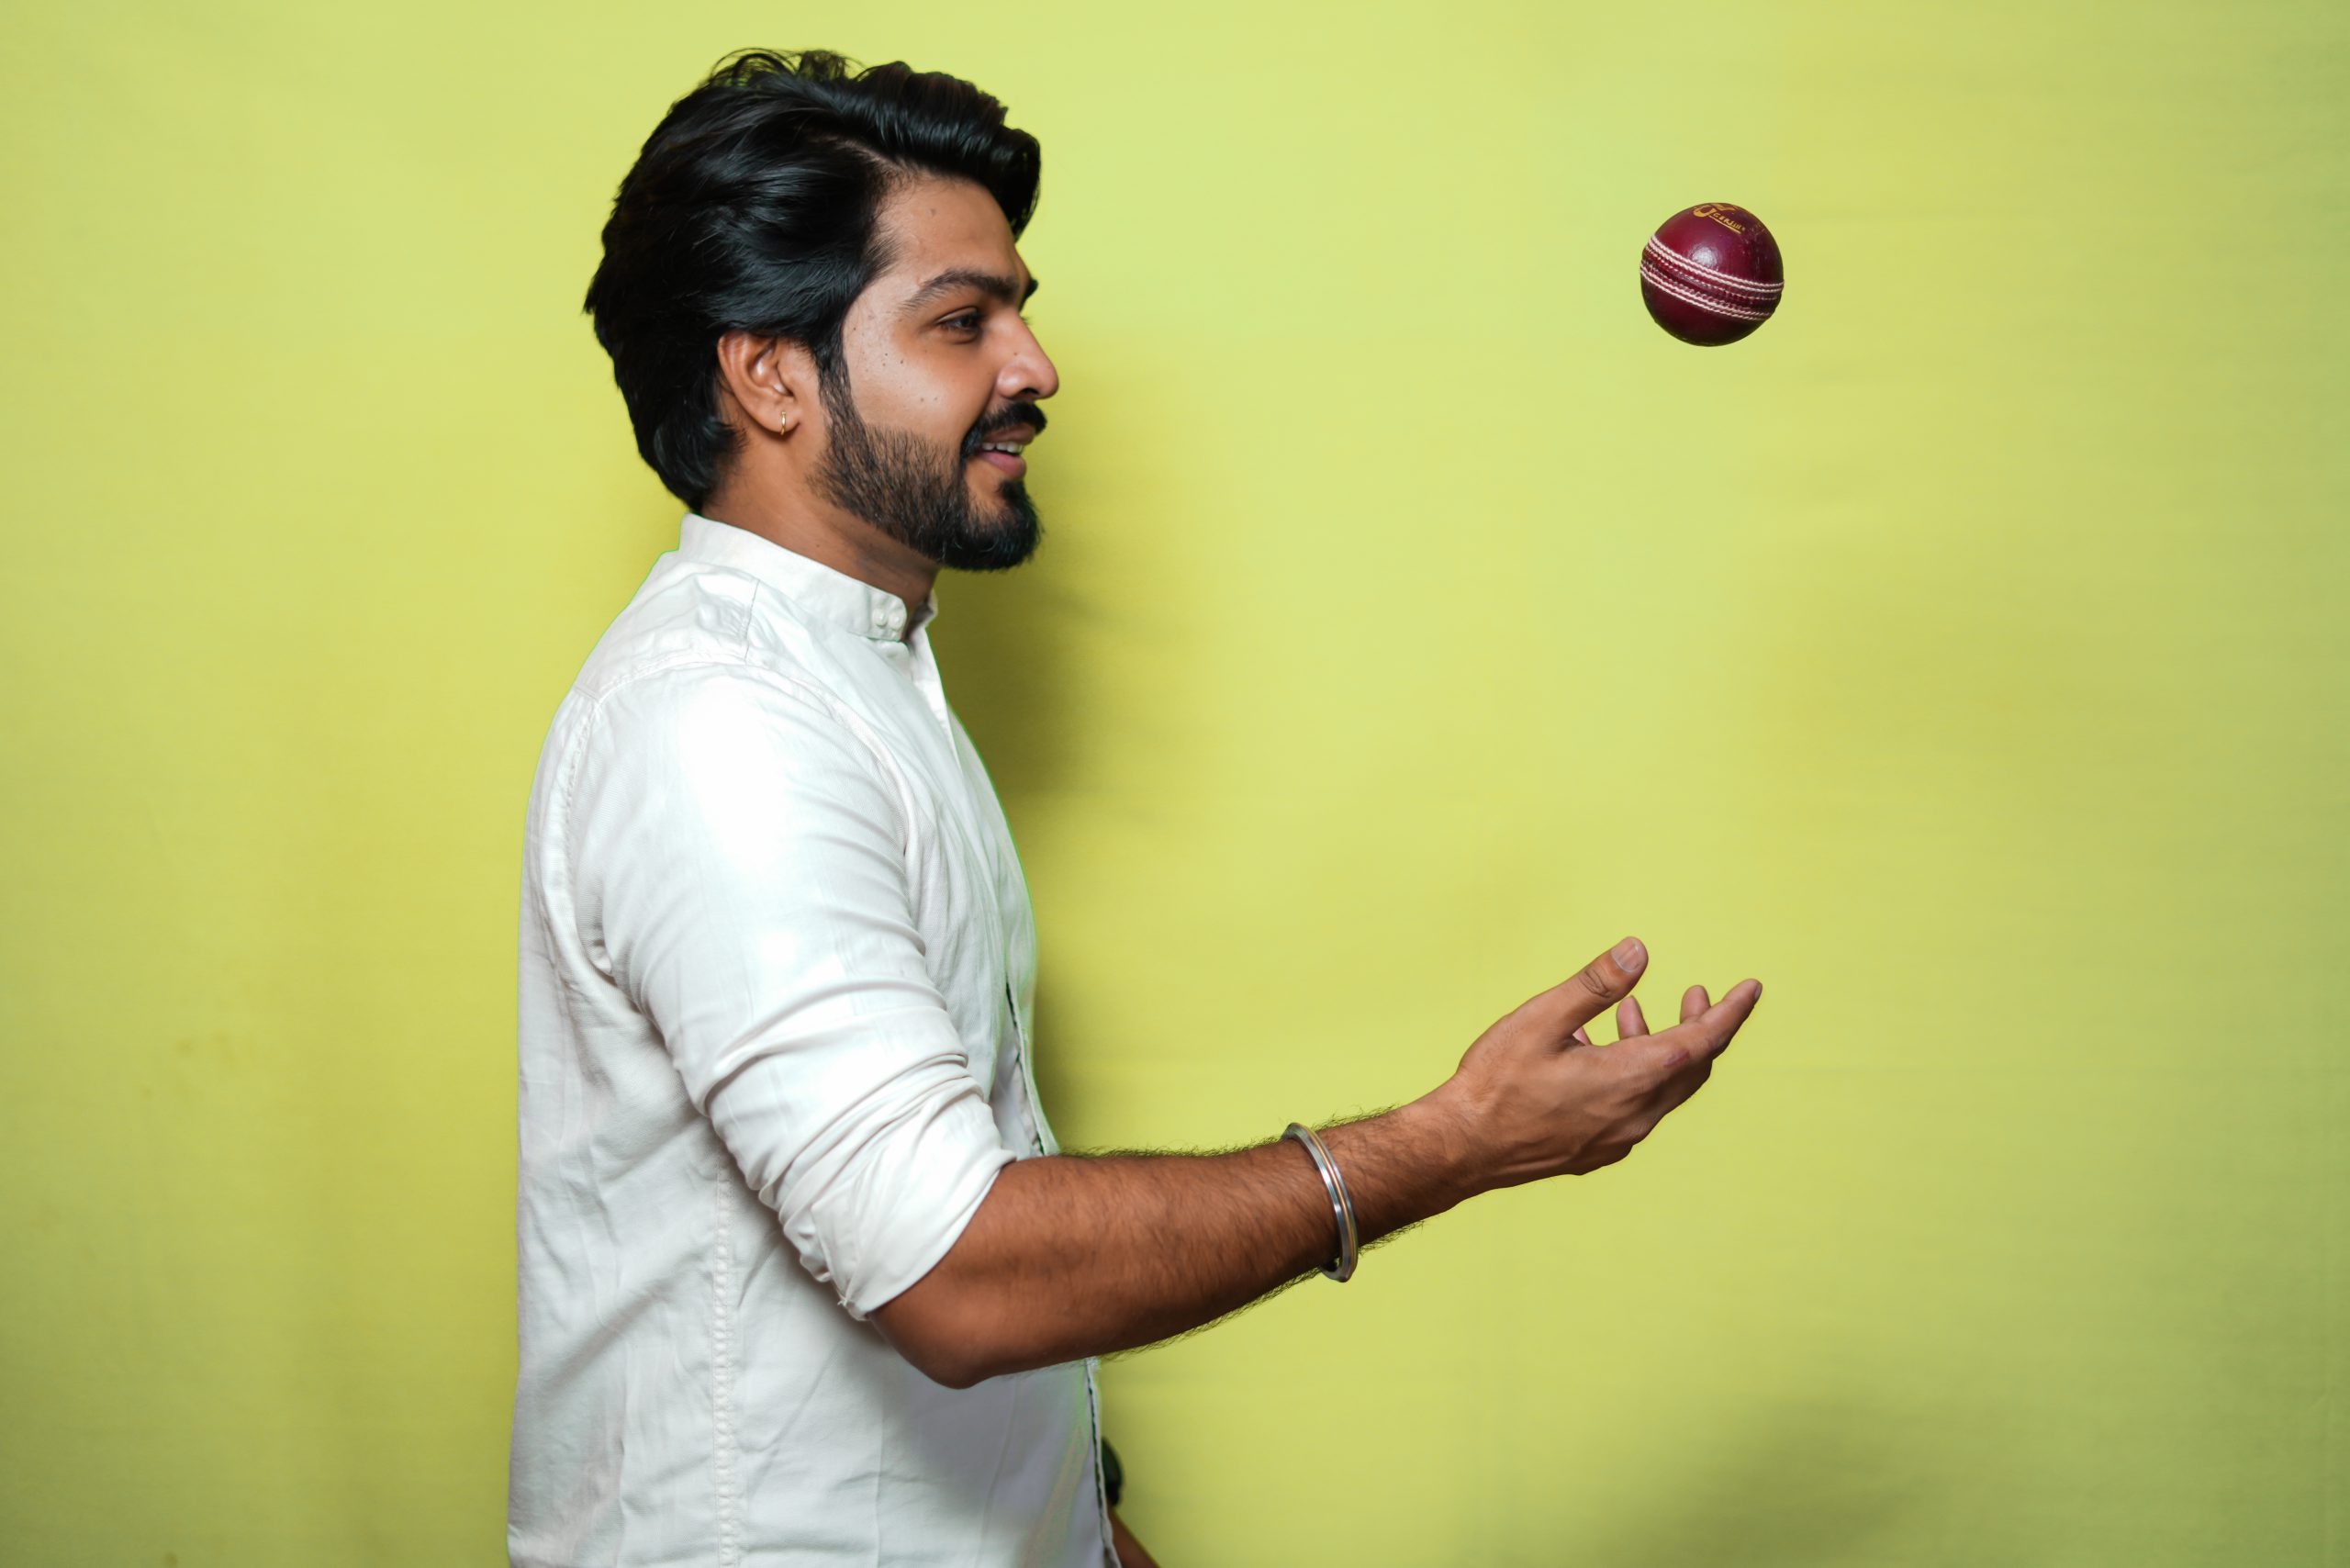 Male model tossing cricket ball